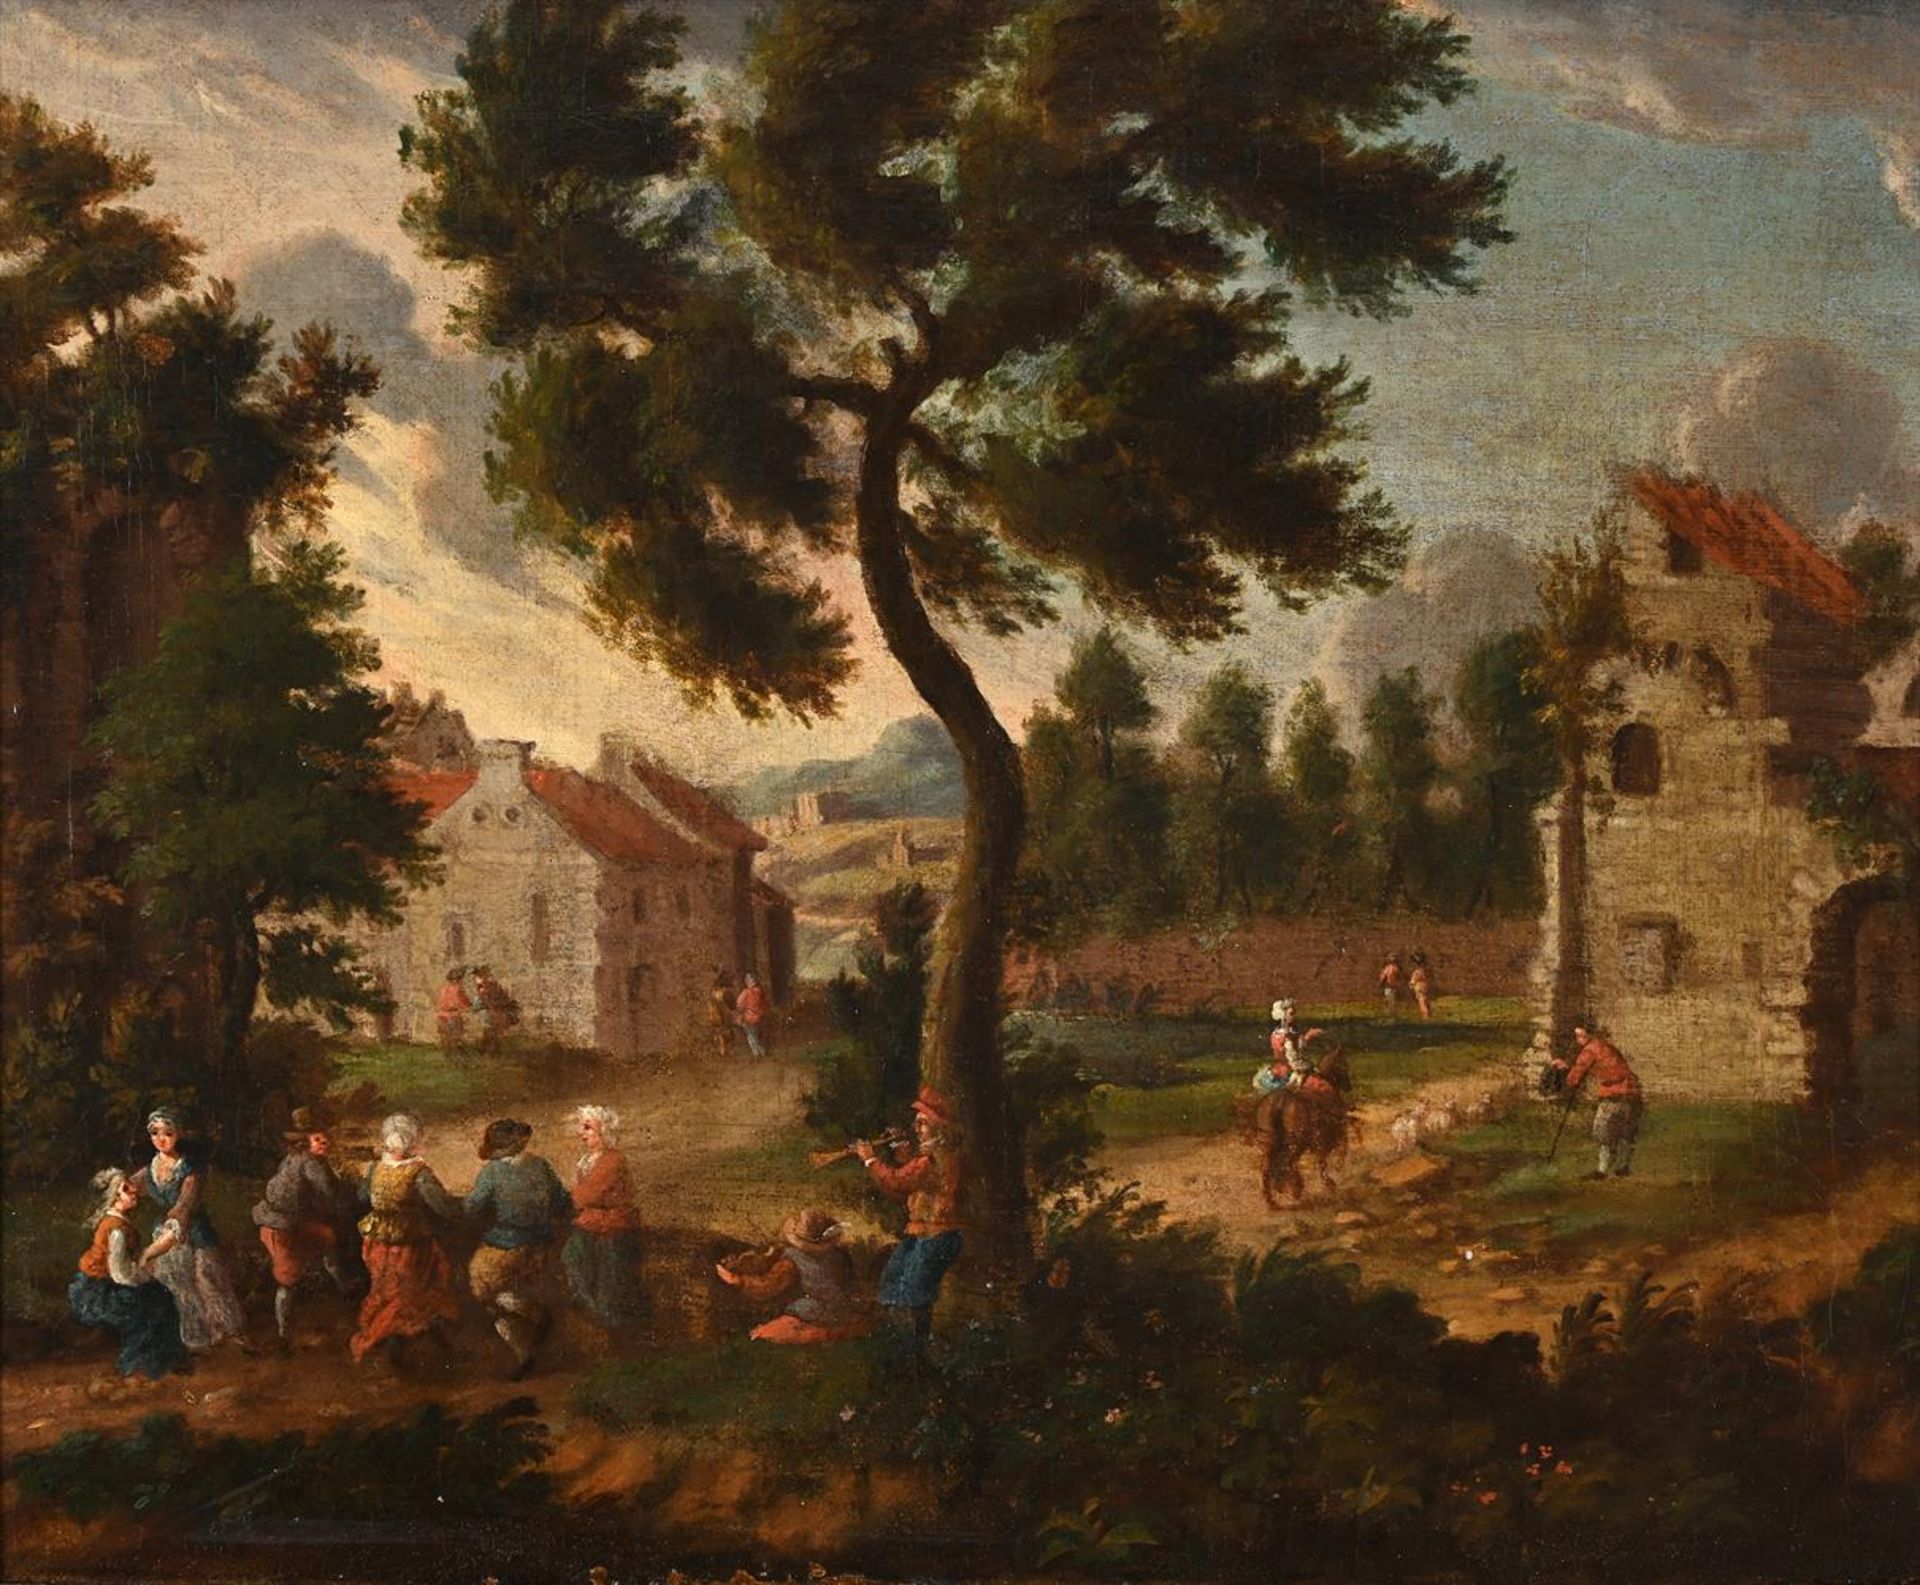 FLEMISH SCHOOL (18TH CENTURY), VILLAGERS IN A LANDSCAPE - Image 2 of 3